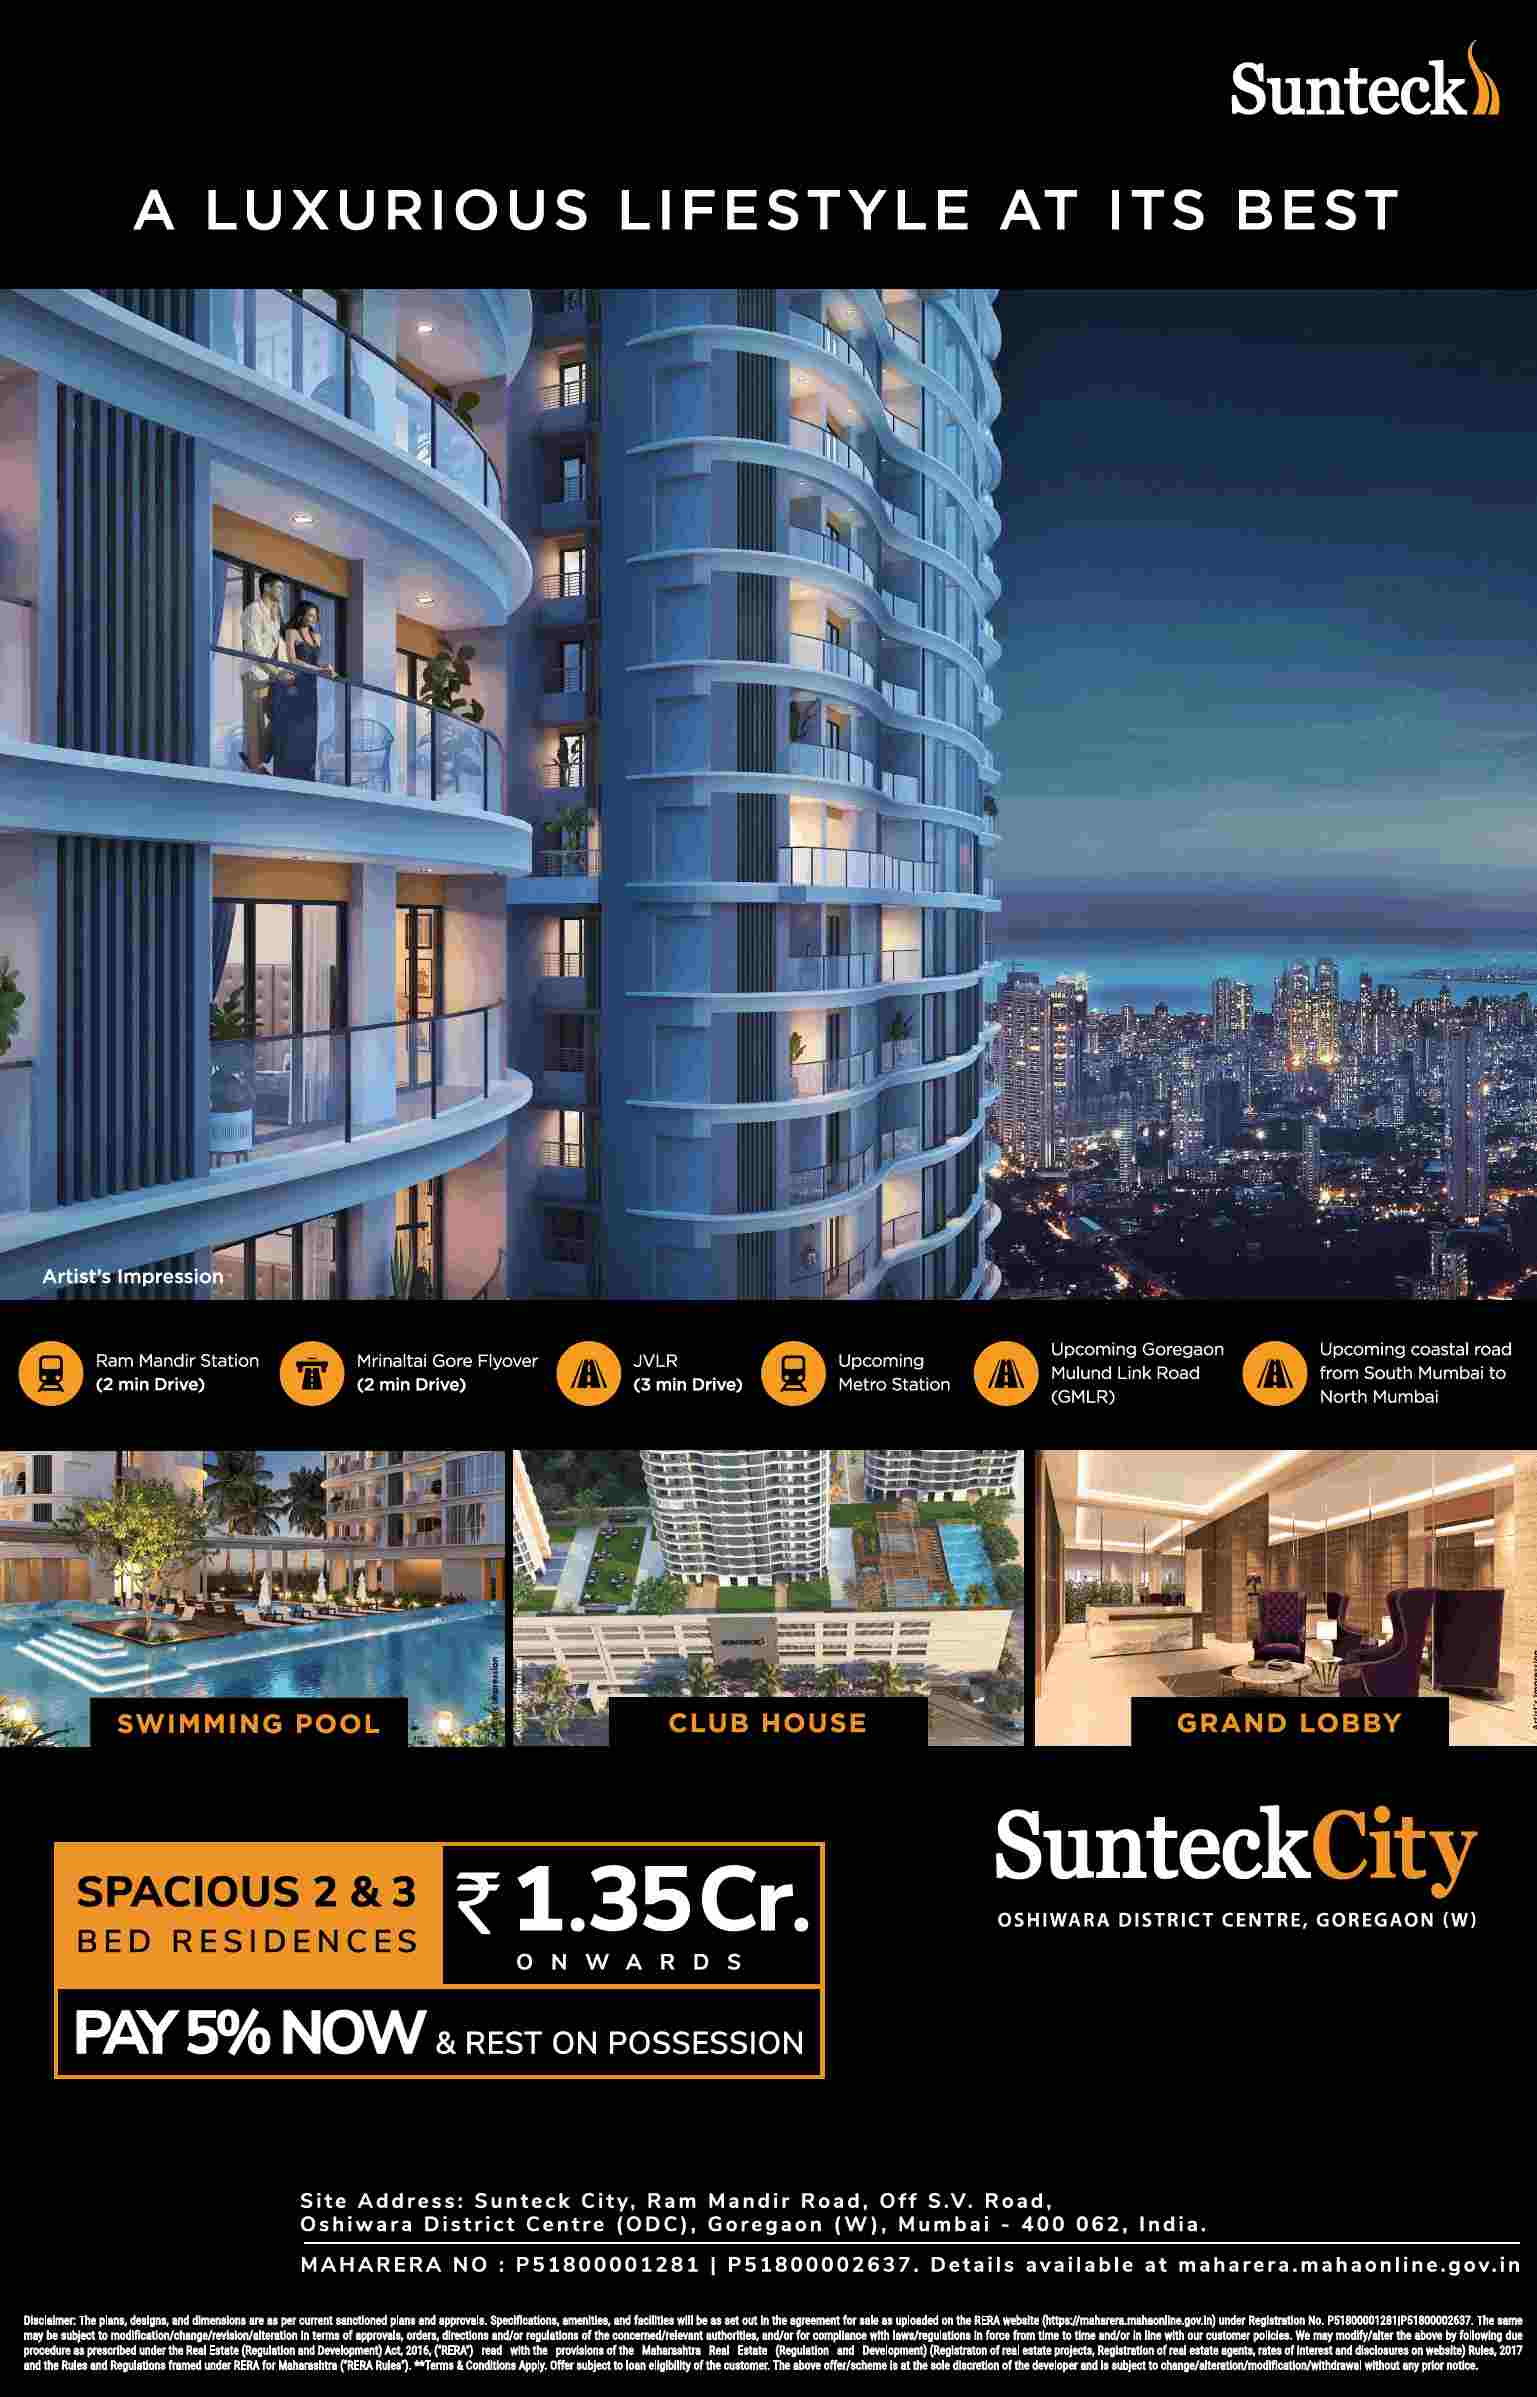 Pay 5% now and rest on possession at Sunteck City in Goregaon West, Mumbai